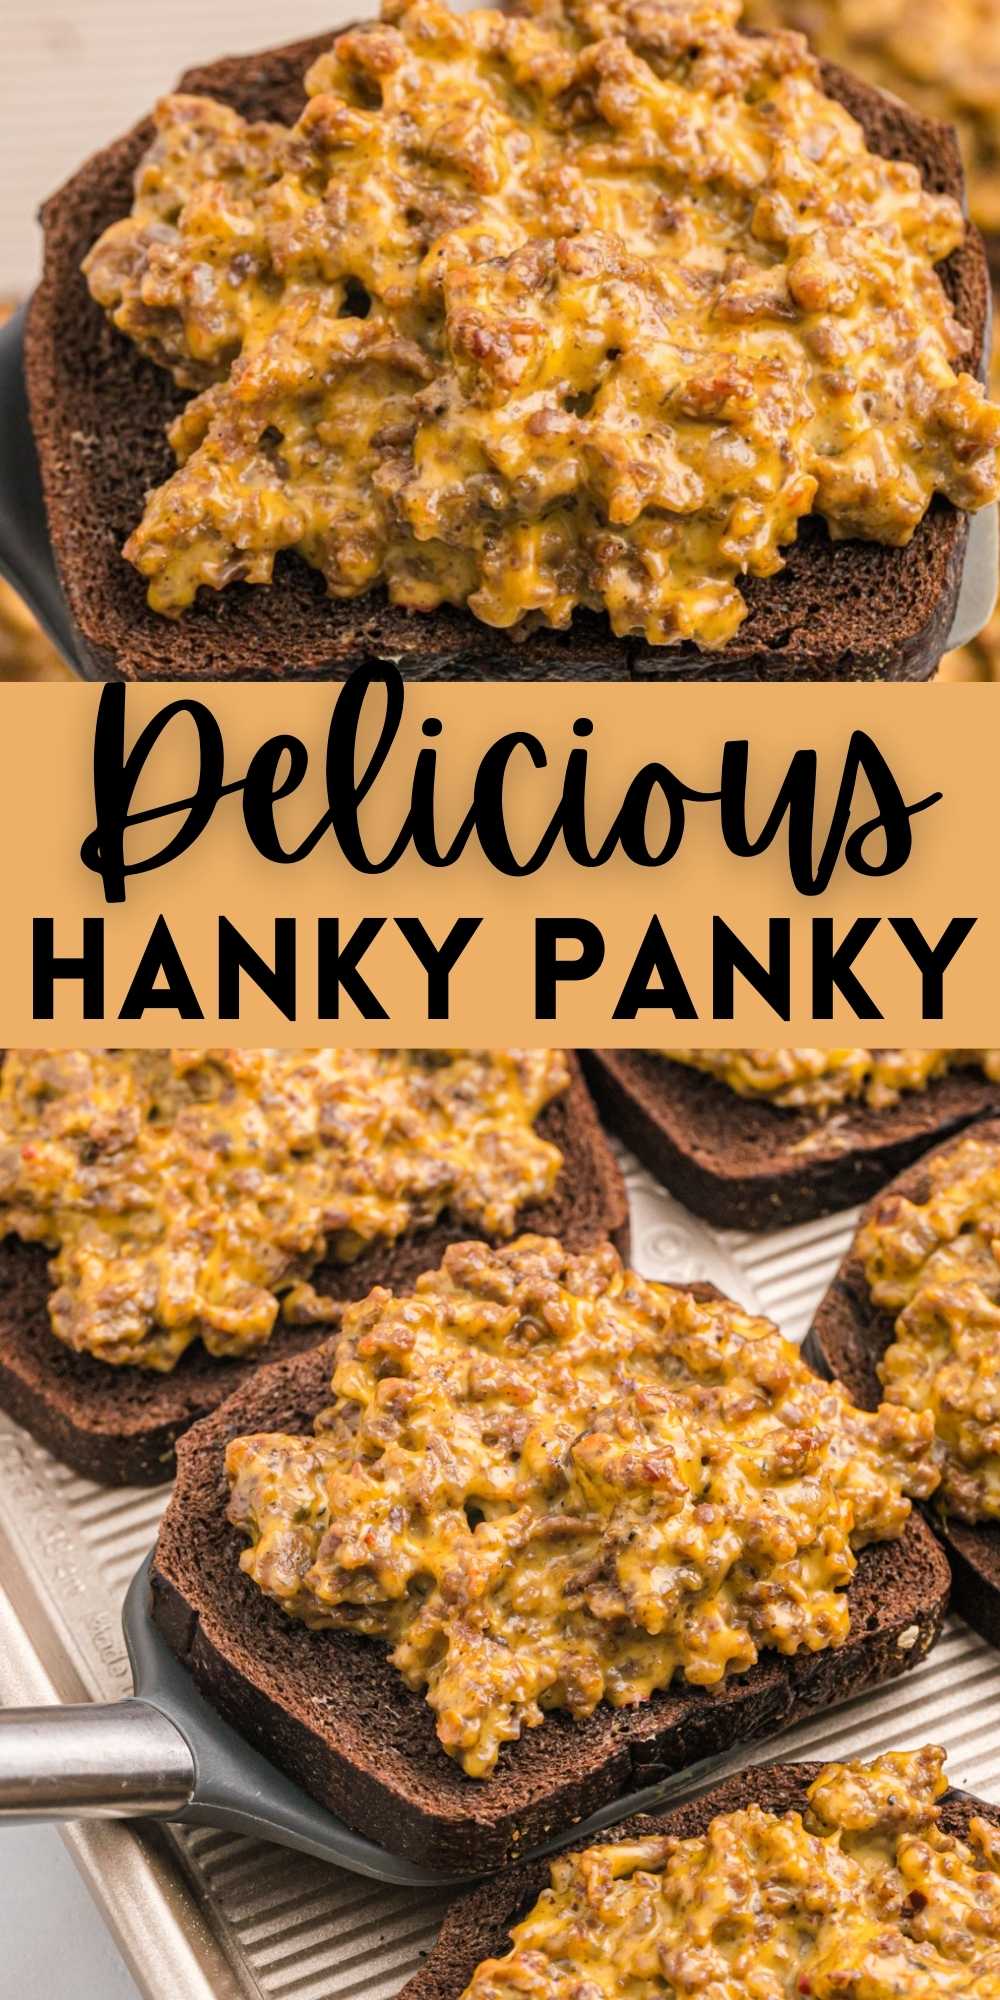 Hanky Panky is an old fashioned appetizer that is full of flavor. The combination of the ground beef, sausage and Velveeta makes this a crowd favorite. This quick and easy hanky panky is a classic recipe that is made with simple ingredients. #eatingonadime #hankypanky #classic